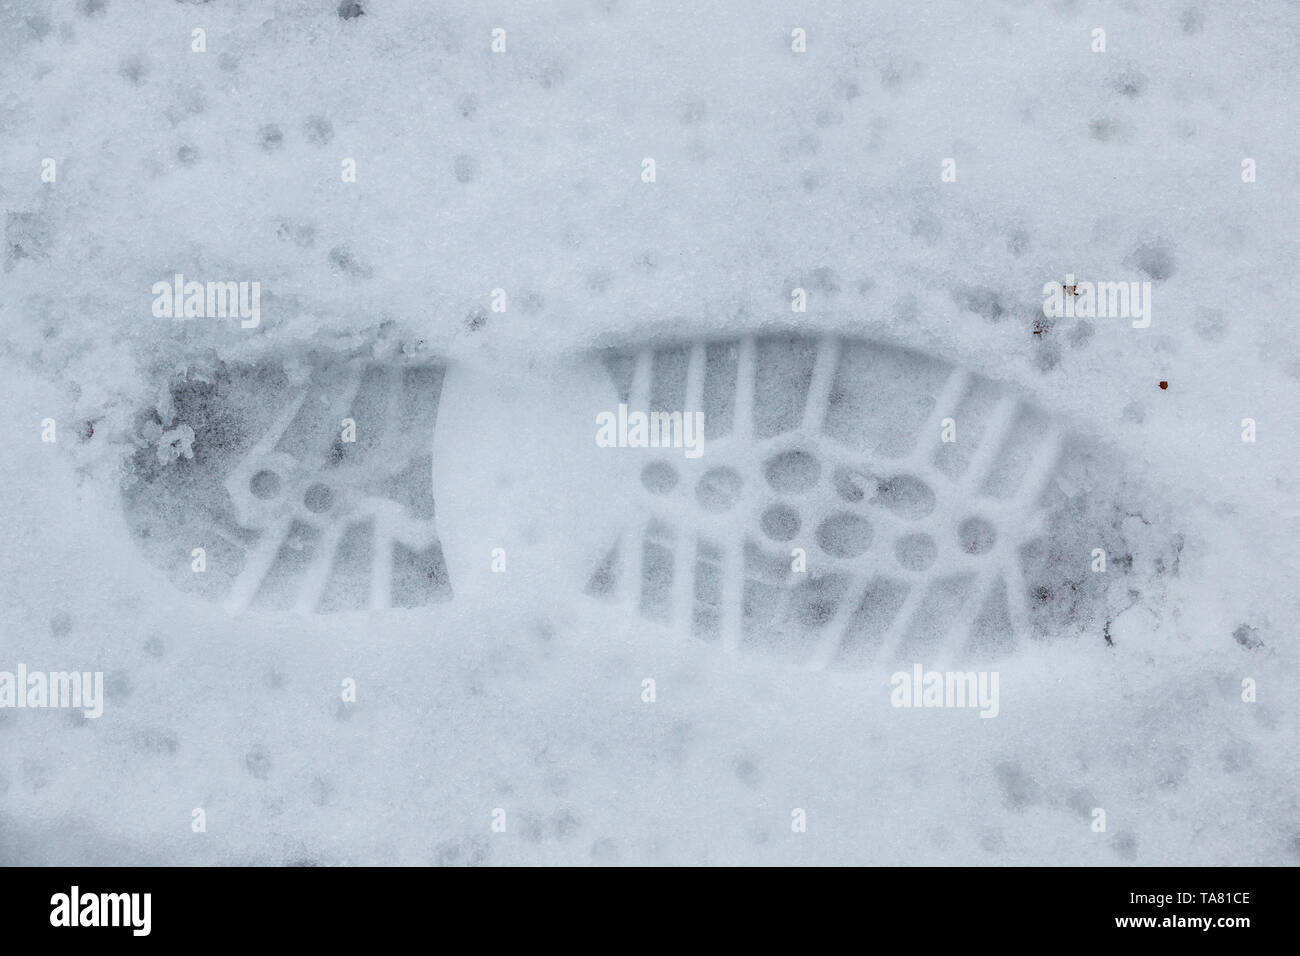 Foot print of a human shoe on the white snow Stock Photo